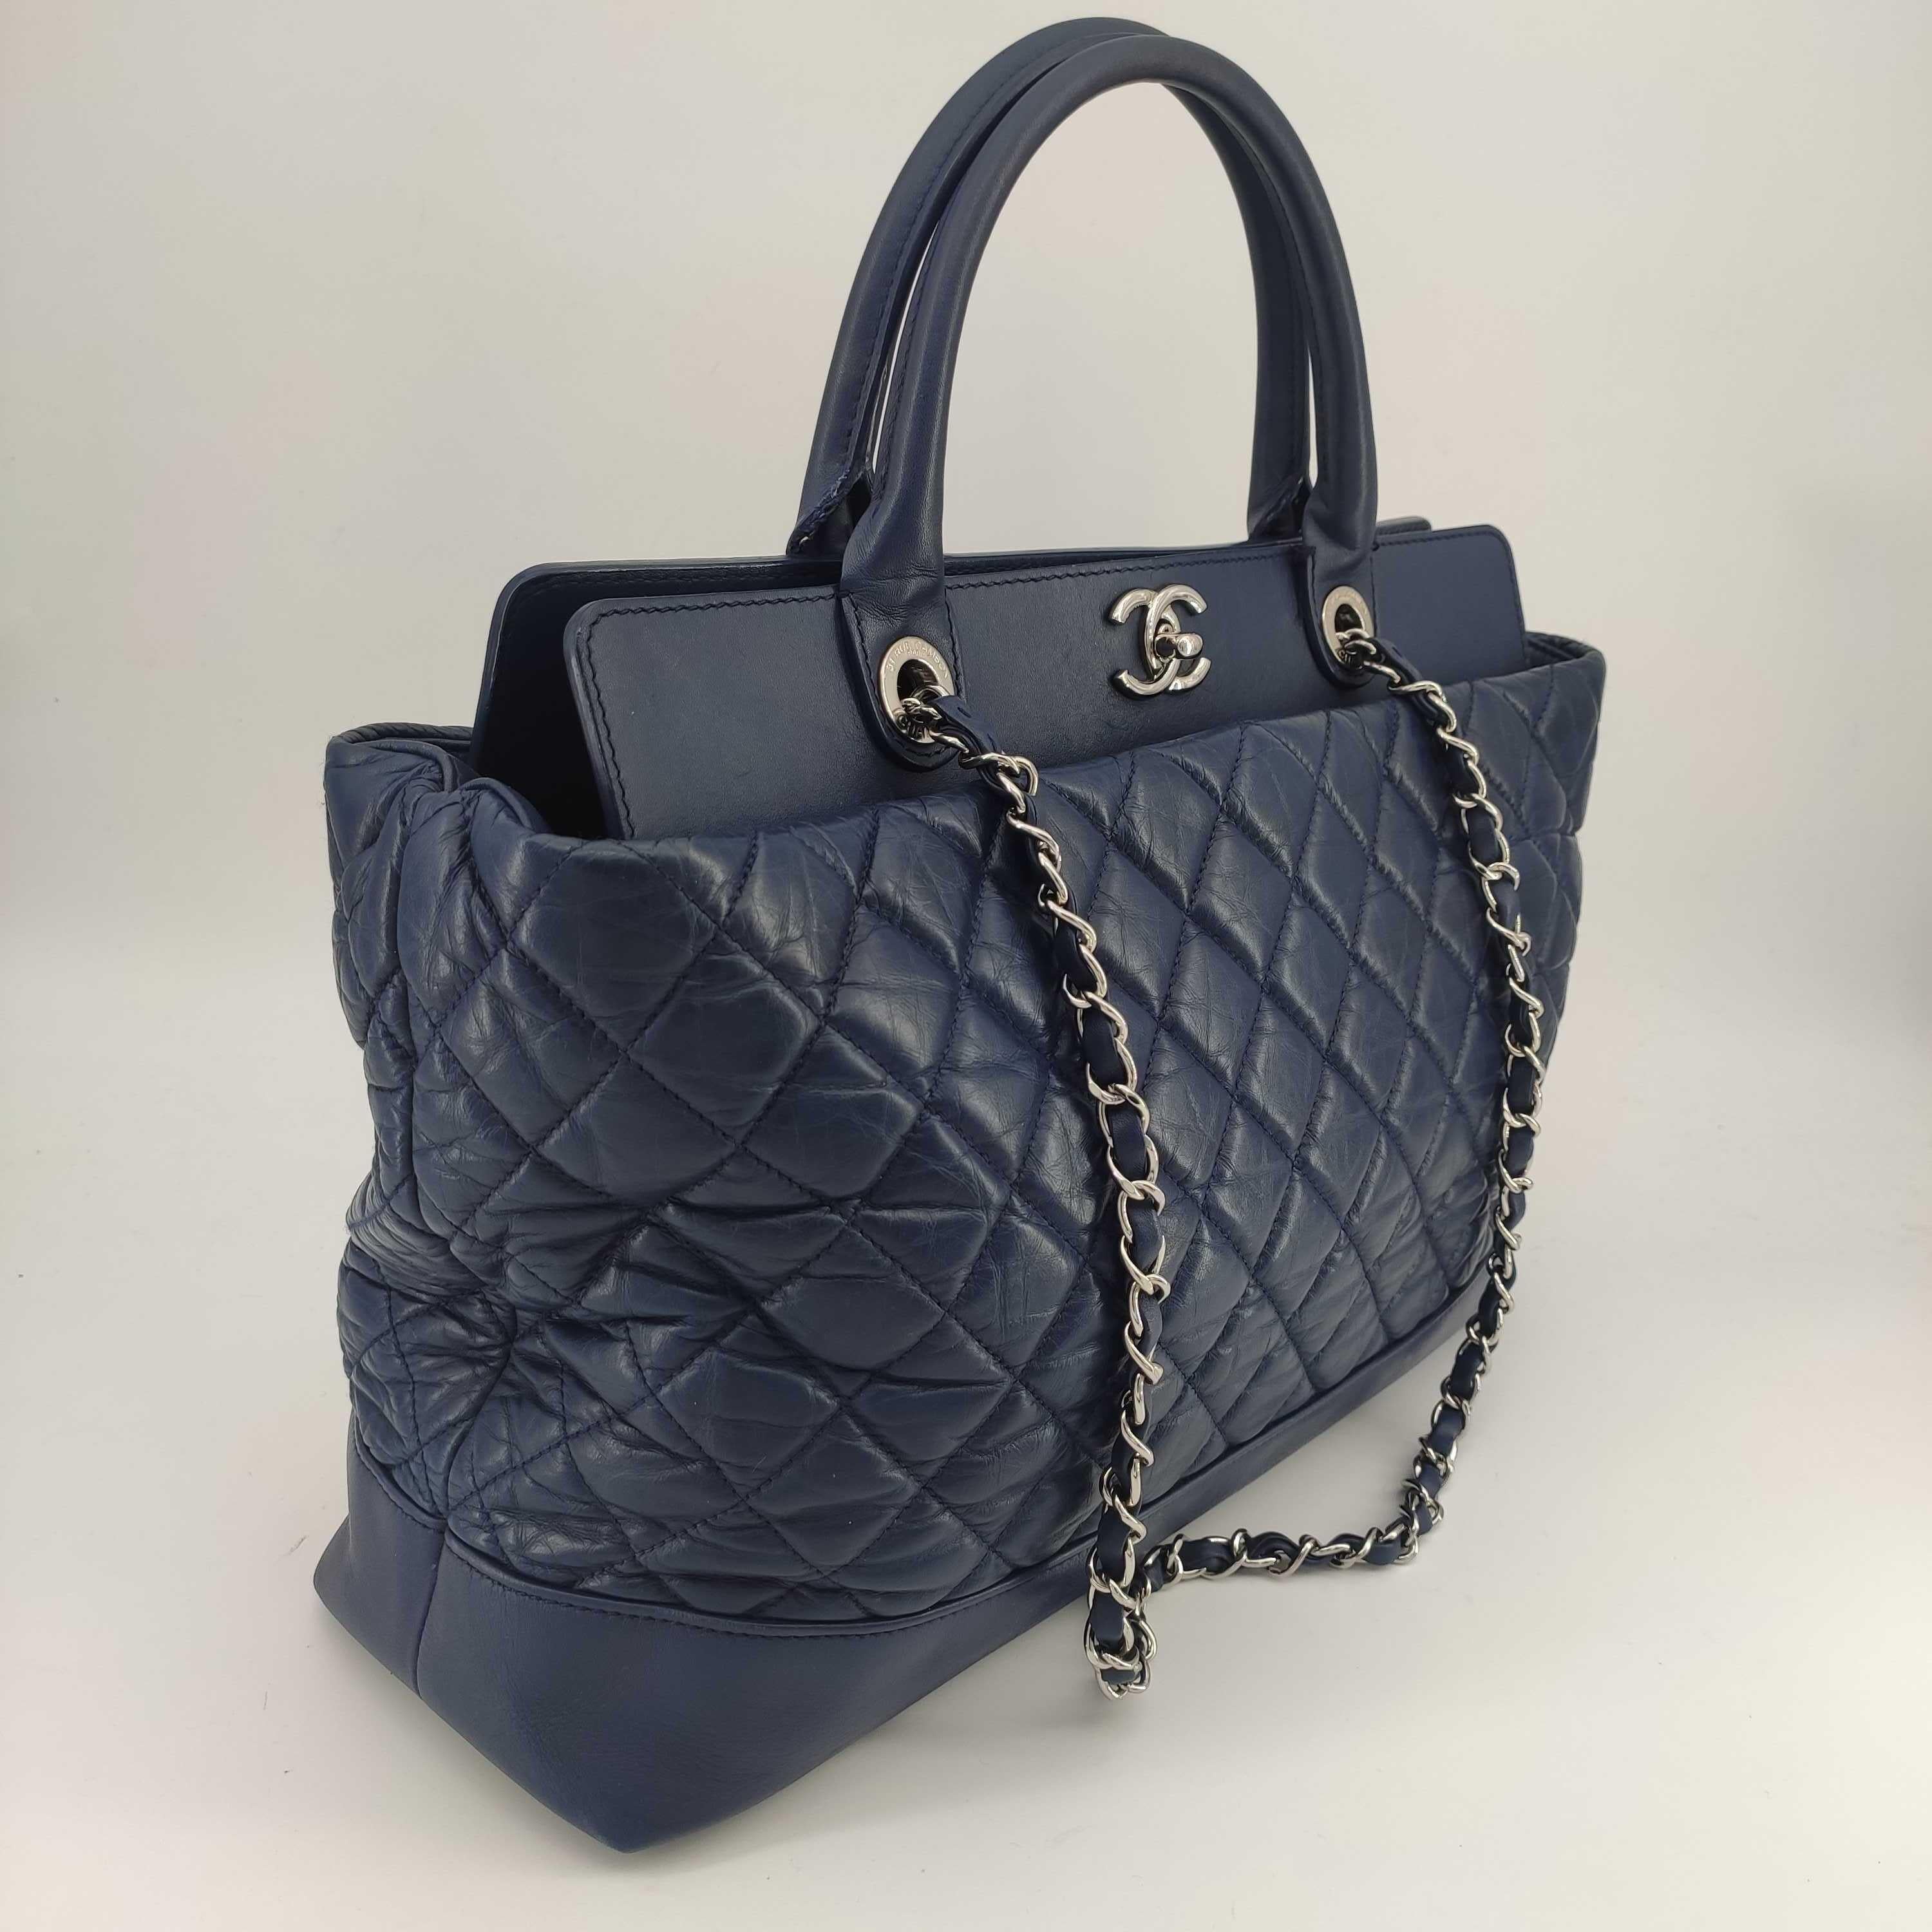 - Designer: CHANEL
- Model: Portobello
- Condition: Very good condition. Interior stains, Sign of wear on base corners, Sign of wear on Leather
- Accessories: None
- Measurements: Width: 38cm, Height: 25cm, Depth: 12cm
- Exterior Material: Leather
-